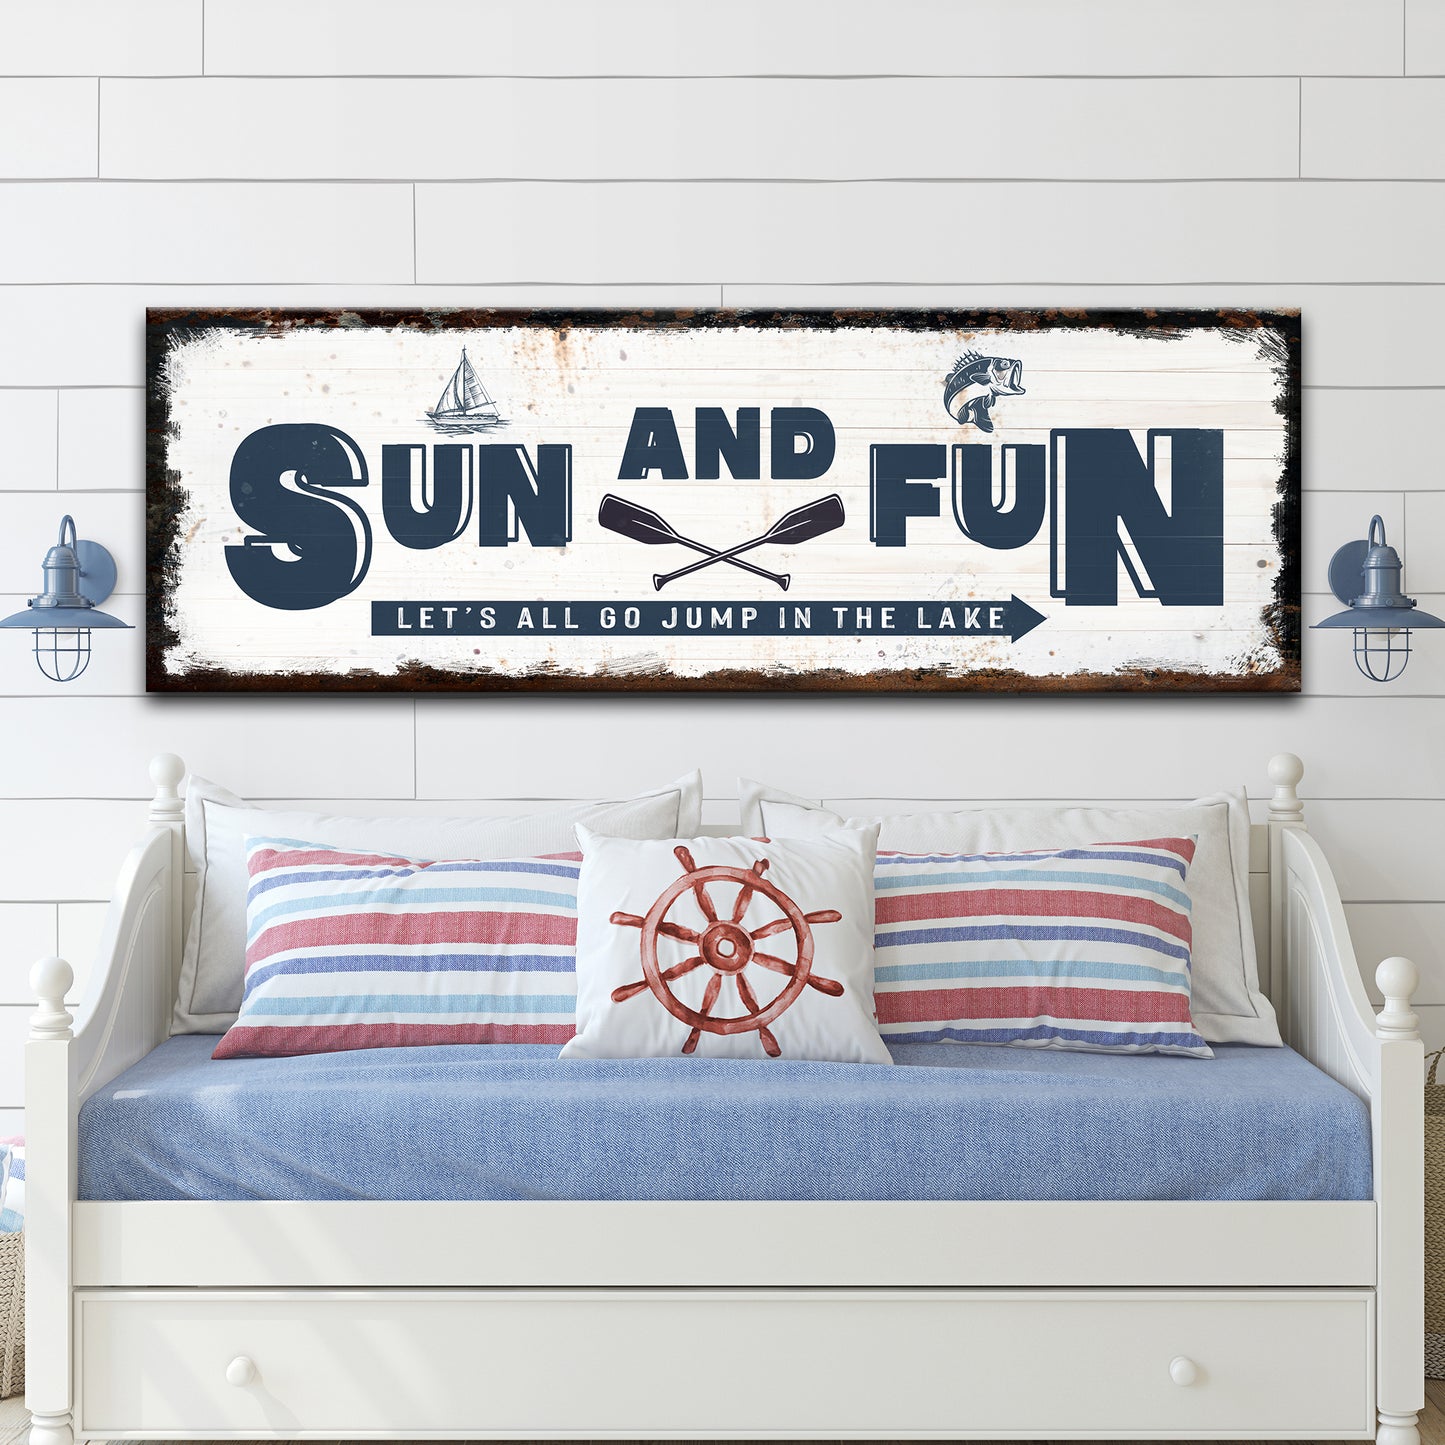 Sun and Fun Sign - Image by Tailored Canvases